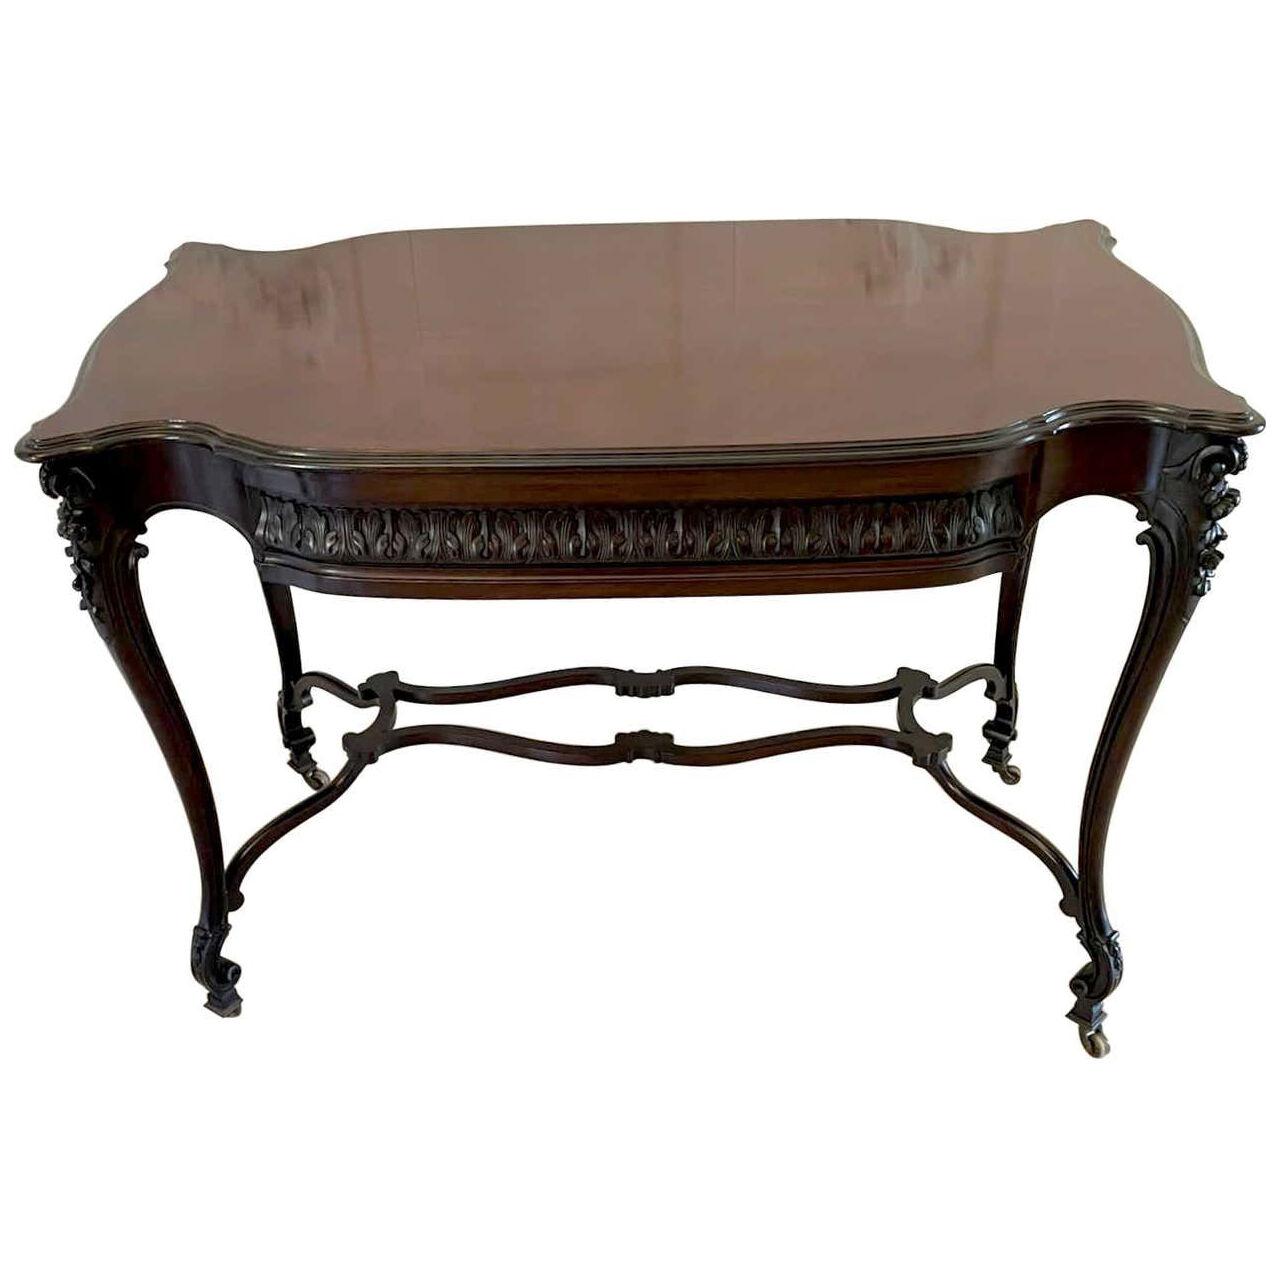 Outstanding Quality Antique Victorian Carved Mahogany Freestanding Centre Table